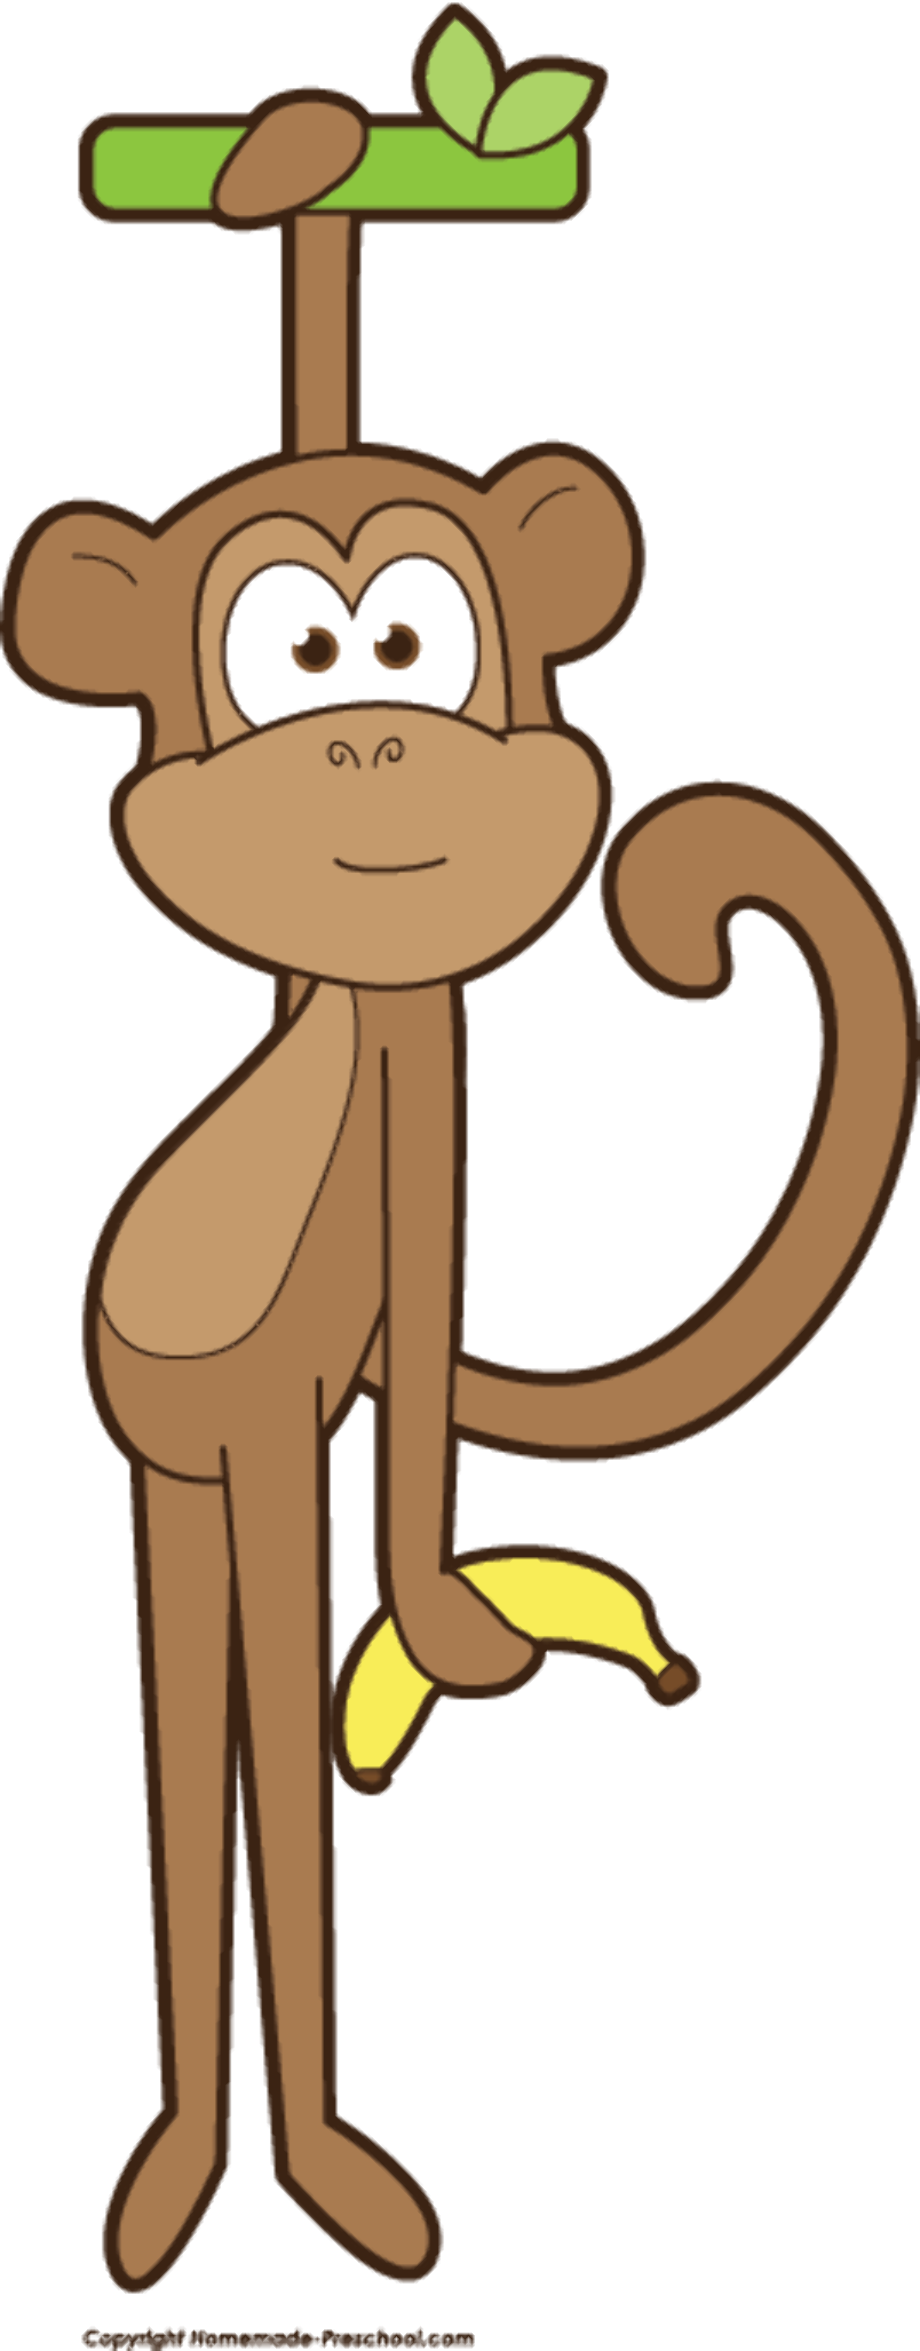 Download High Quality Monkey Clipart Upside Down Transparent Png Images